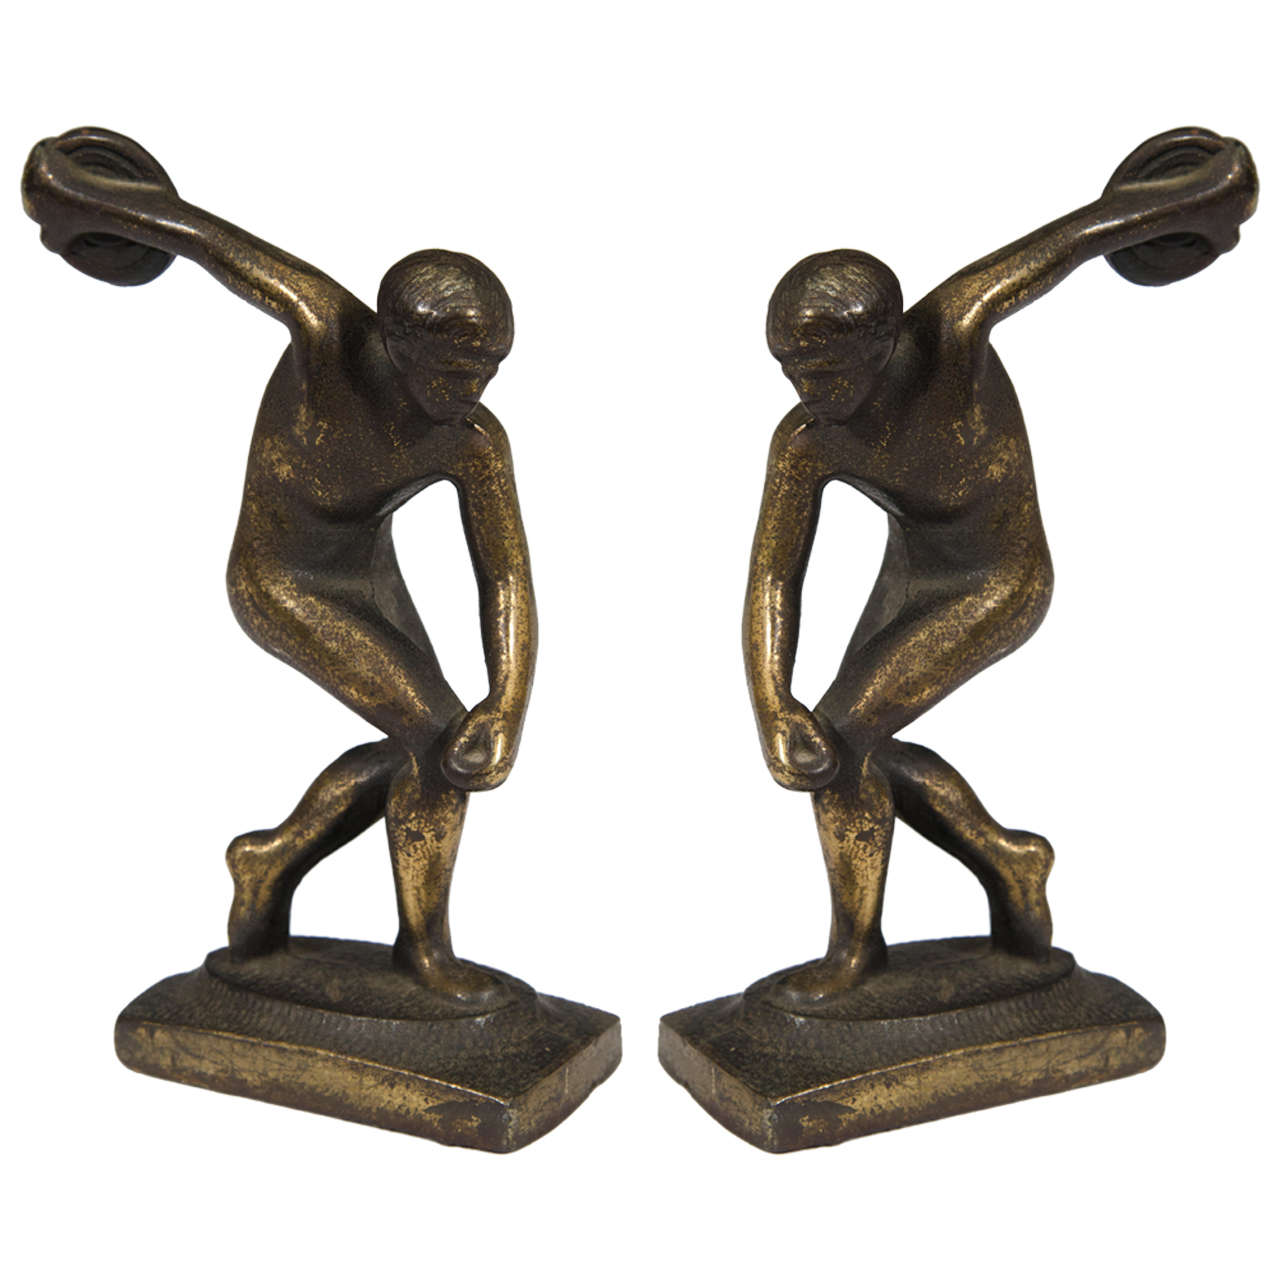 Pair of Art Deco Nude Male Discus Thrower Bookends